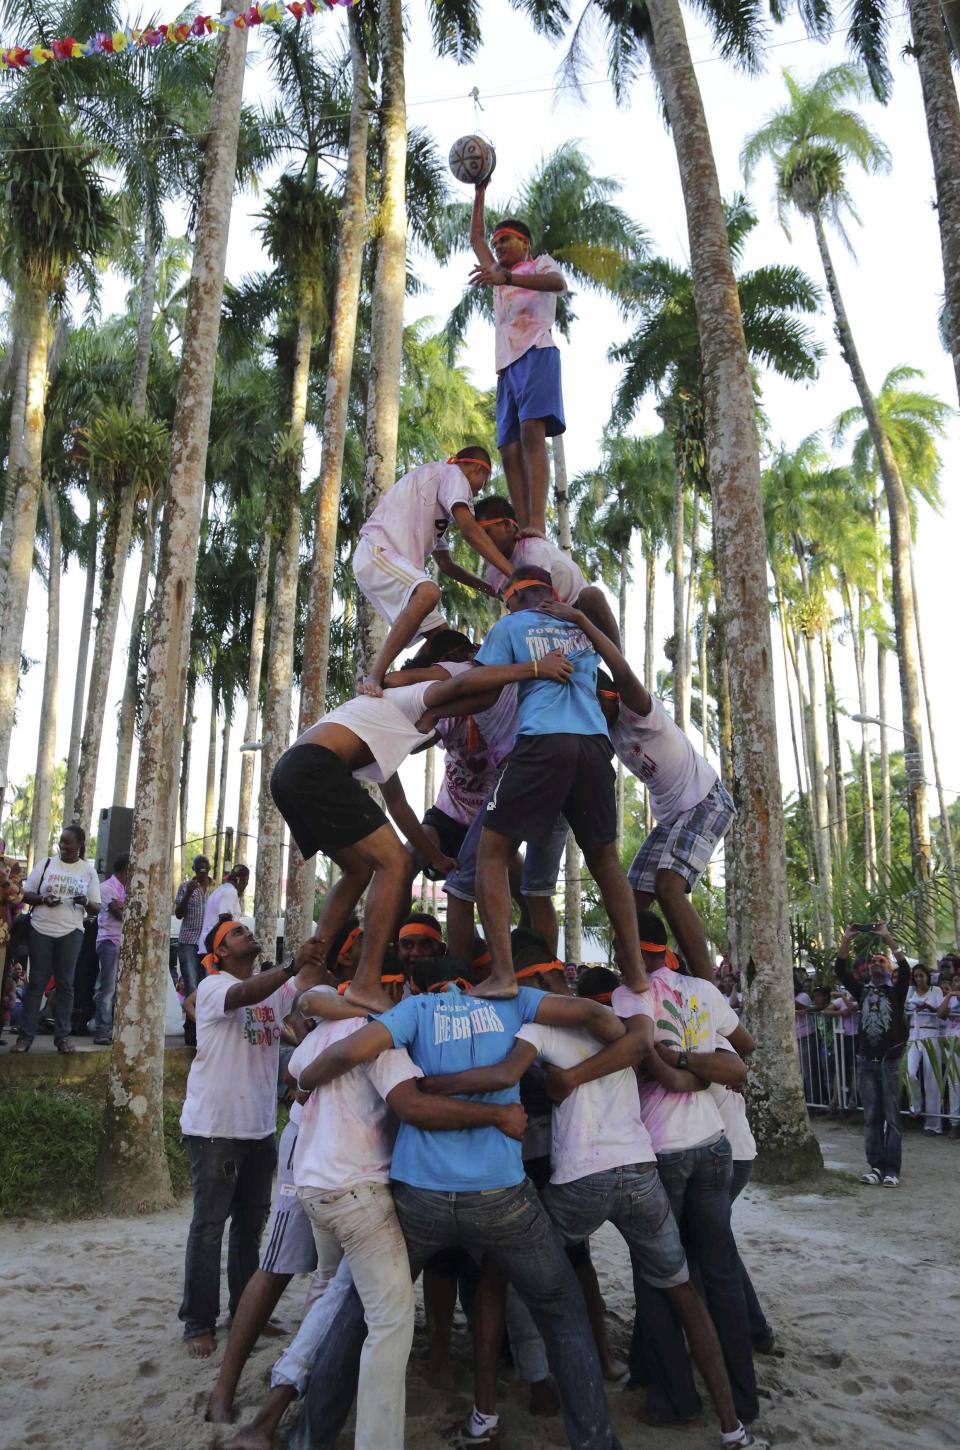 Surinamese men of mixed ethnic origins compete in the Indian folk sport called Makhan Chor (butter thief) during the Hindu Festival of Holi, known as the Festival of Colors, in Paramaribo, Suriname, March 17, 2014. Makhan Chor is played by forming a human pyramid with the lightest on top trying to grab a jar of butter hanging some 6 to 7 meters high. Makhan Chor is also one of the many names of the Hindu Lord Krishna who steals butter with his friends. REUTERS/Ranu Abhelakh (SURINAME - Tags: RELIGION SOCIETY)